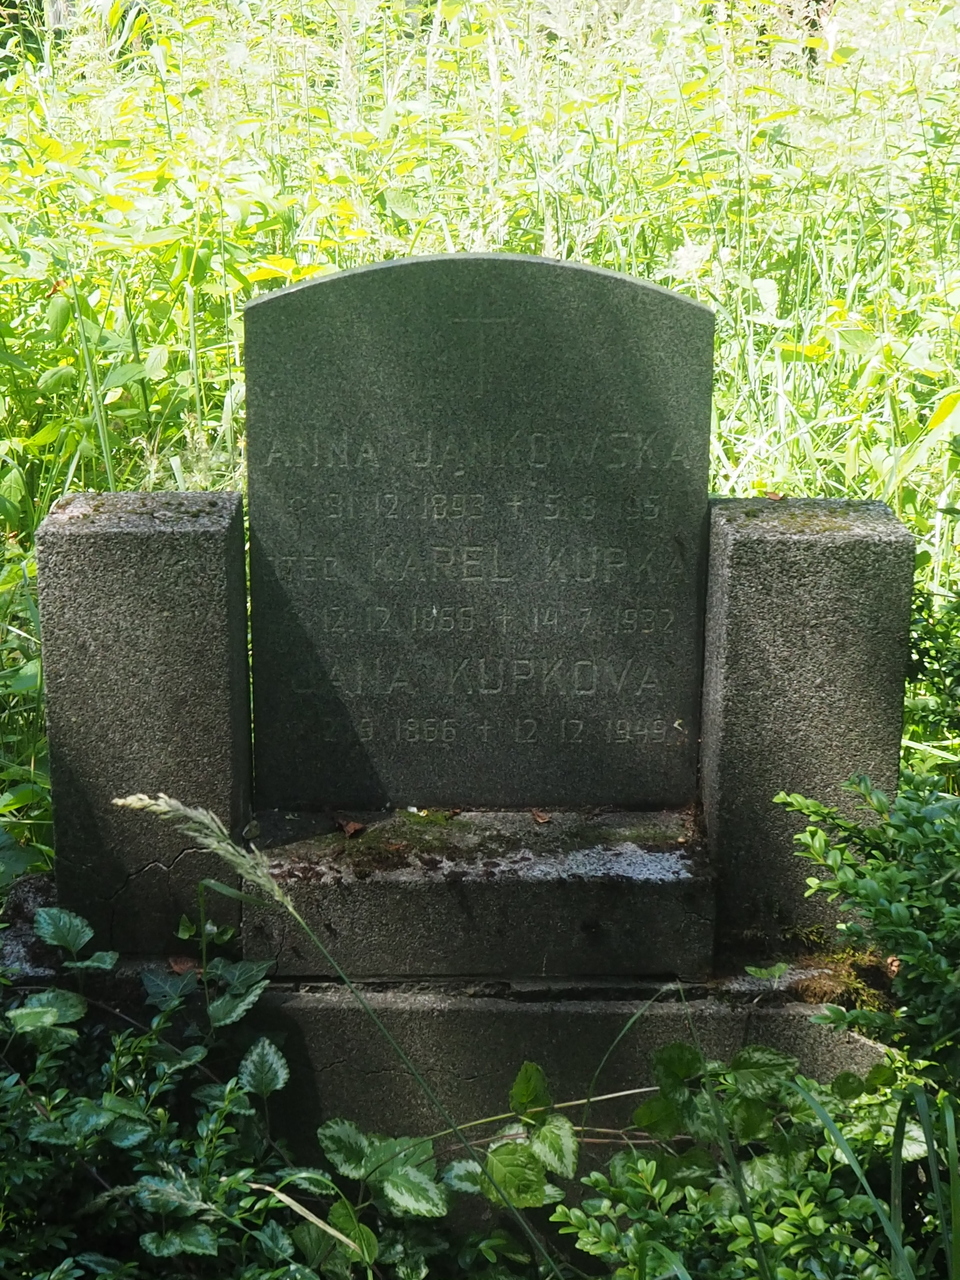 Tombstone of Anna Jankowska, cemetery in Karviná Mexico, as of 20122